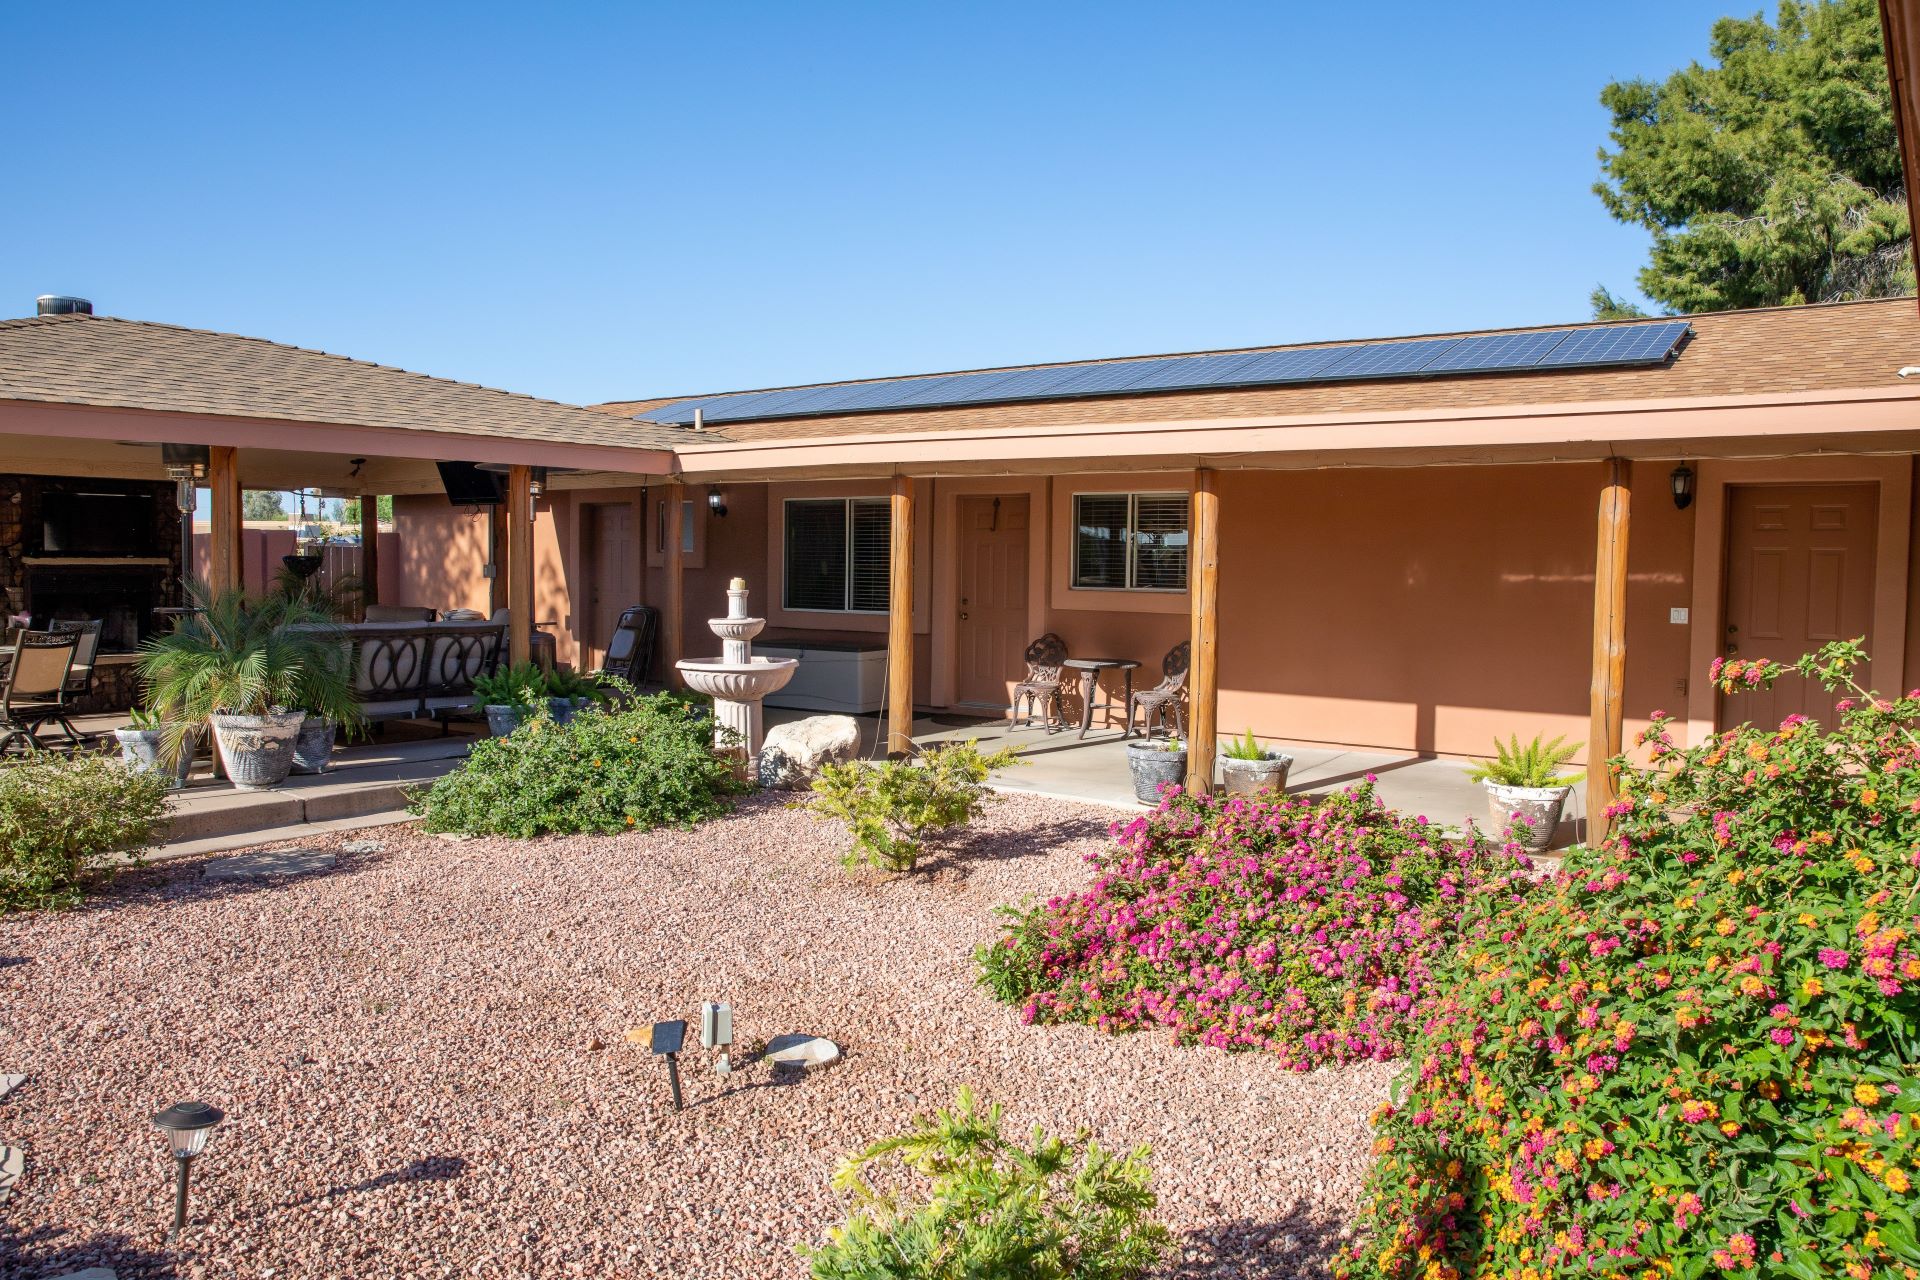 ranch style home with solar panels on the roof